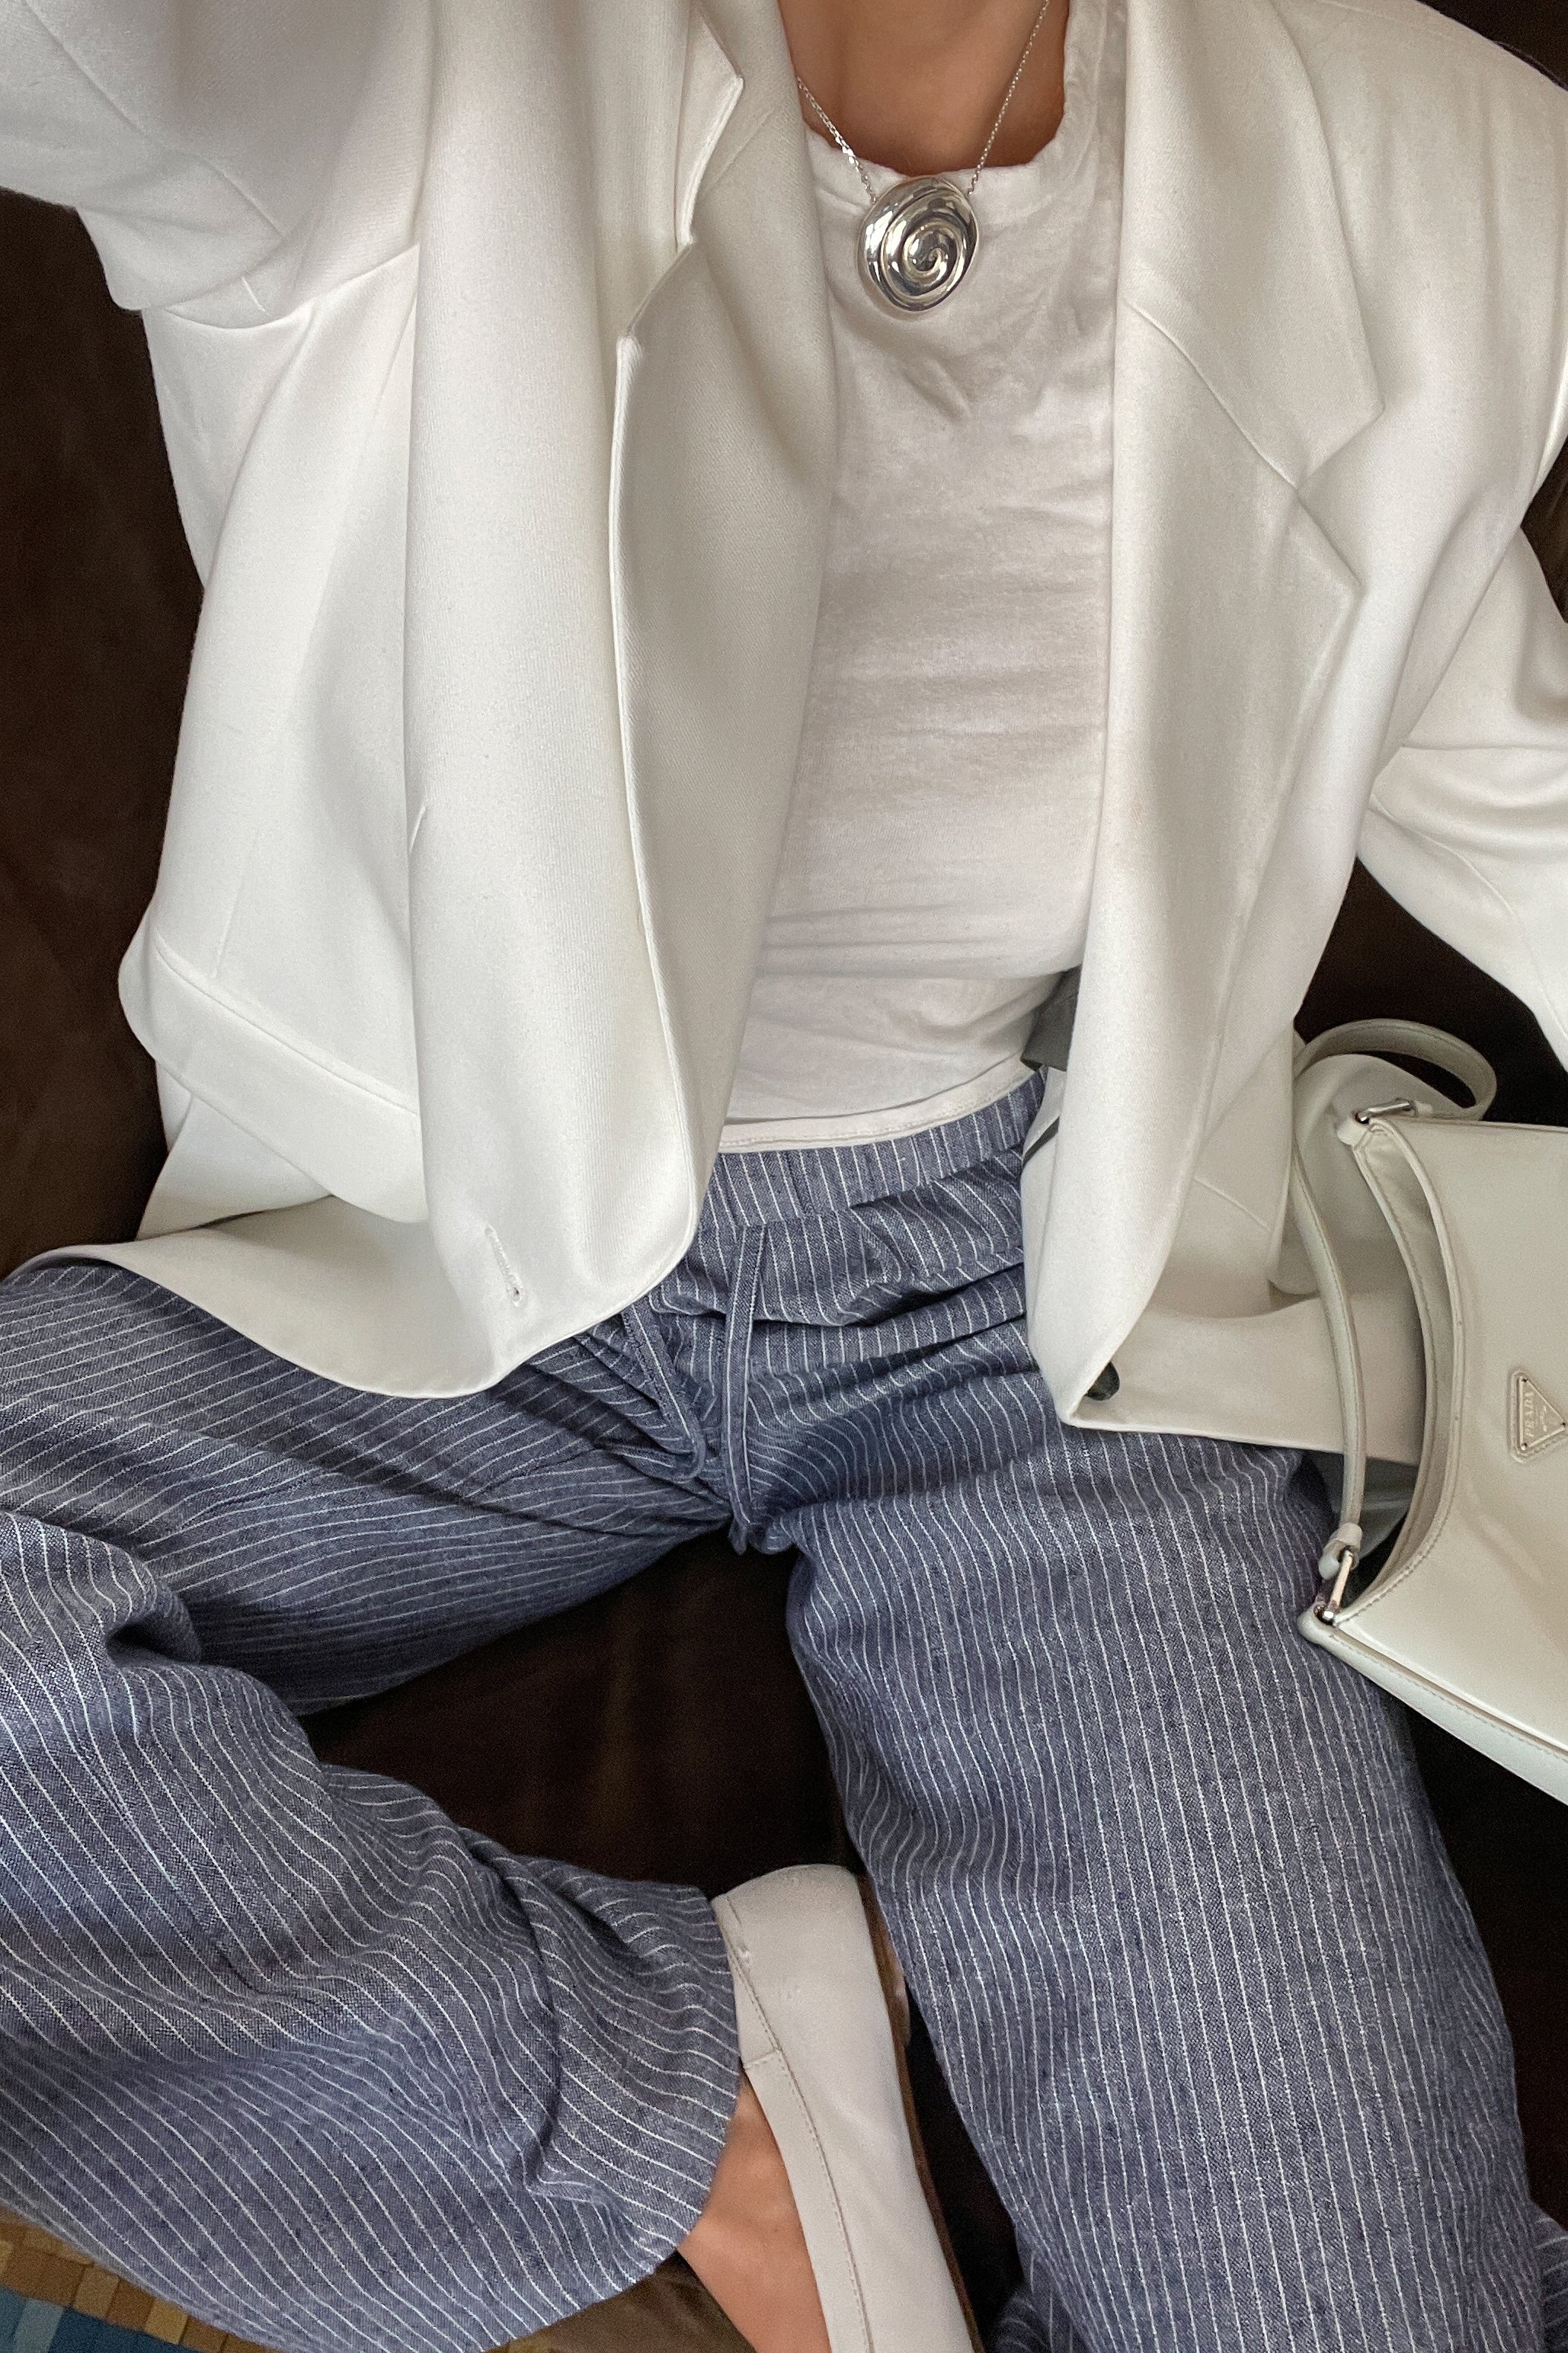 White Jeans with Black Shoes Relaxed Summer Outfits For Men In Their 20s  (10 ideas & outfits) | Lookastic